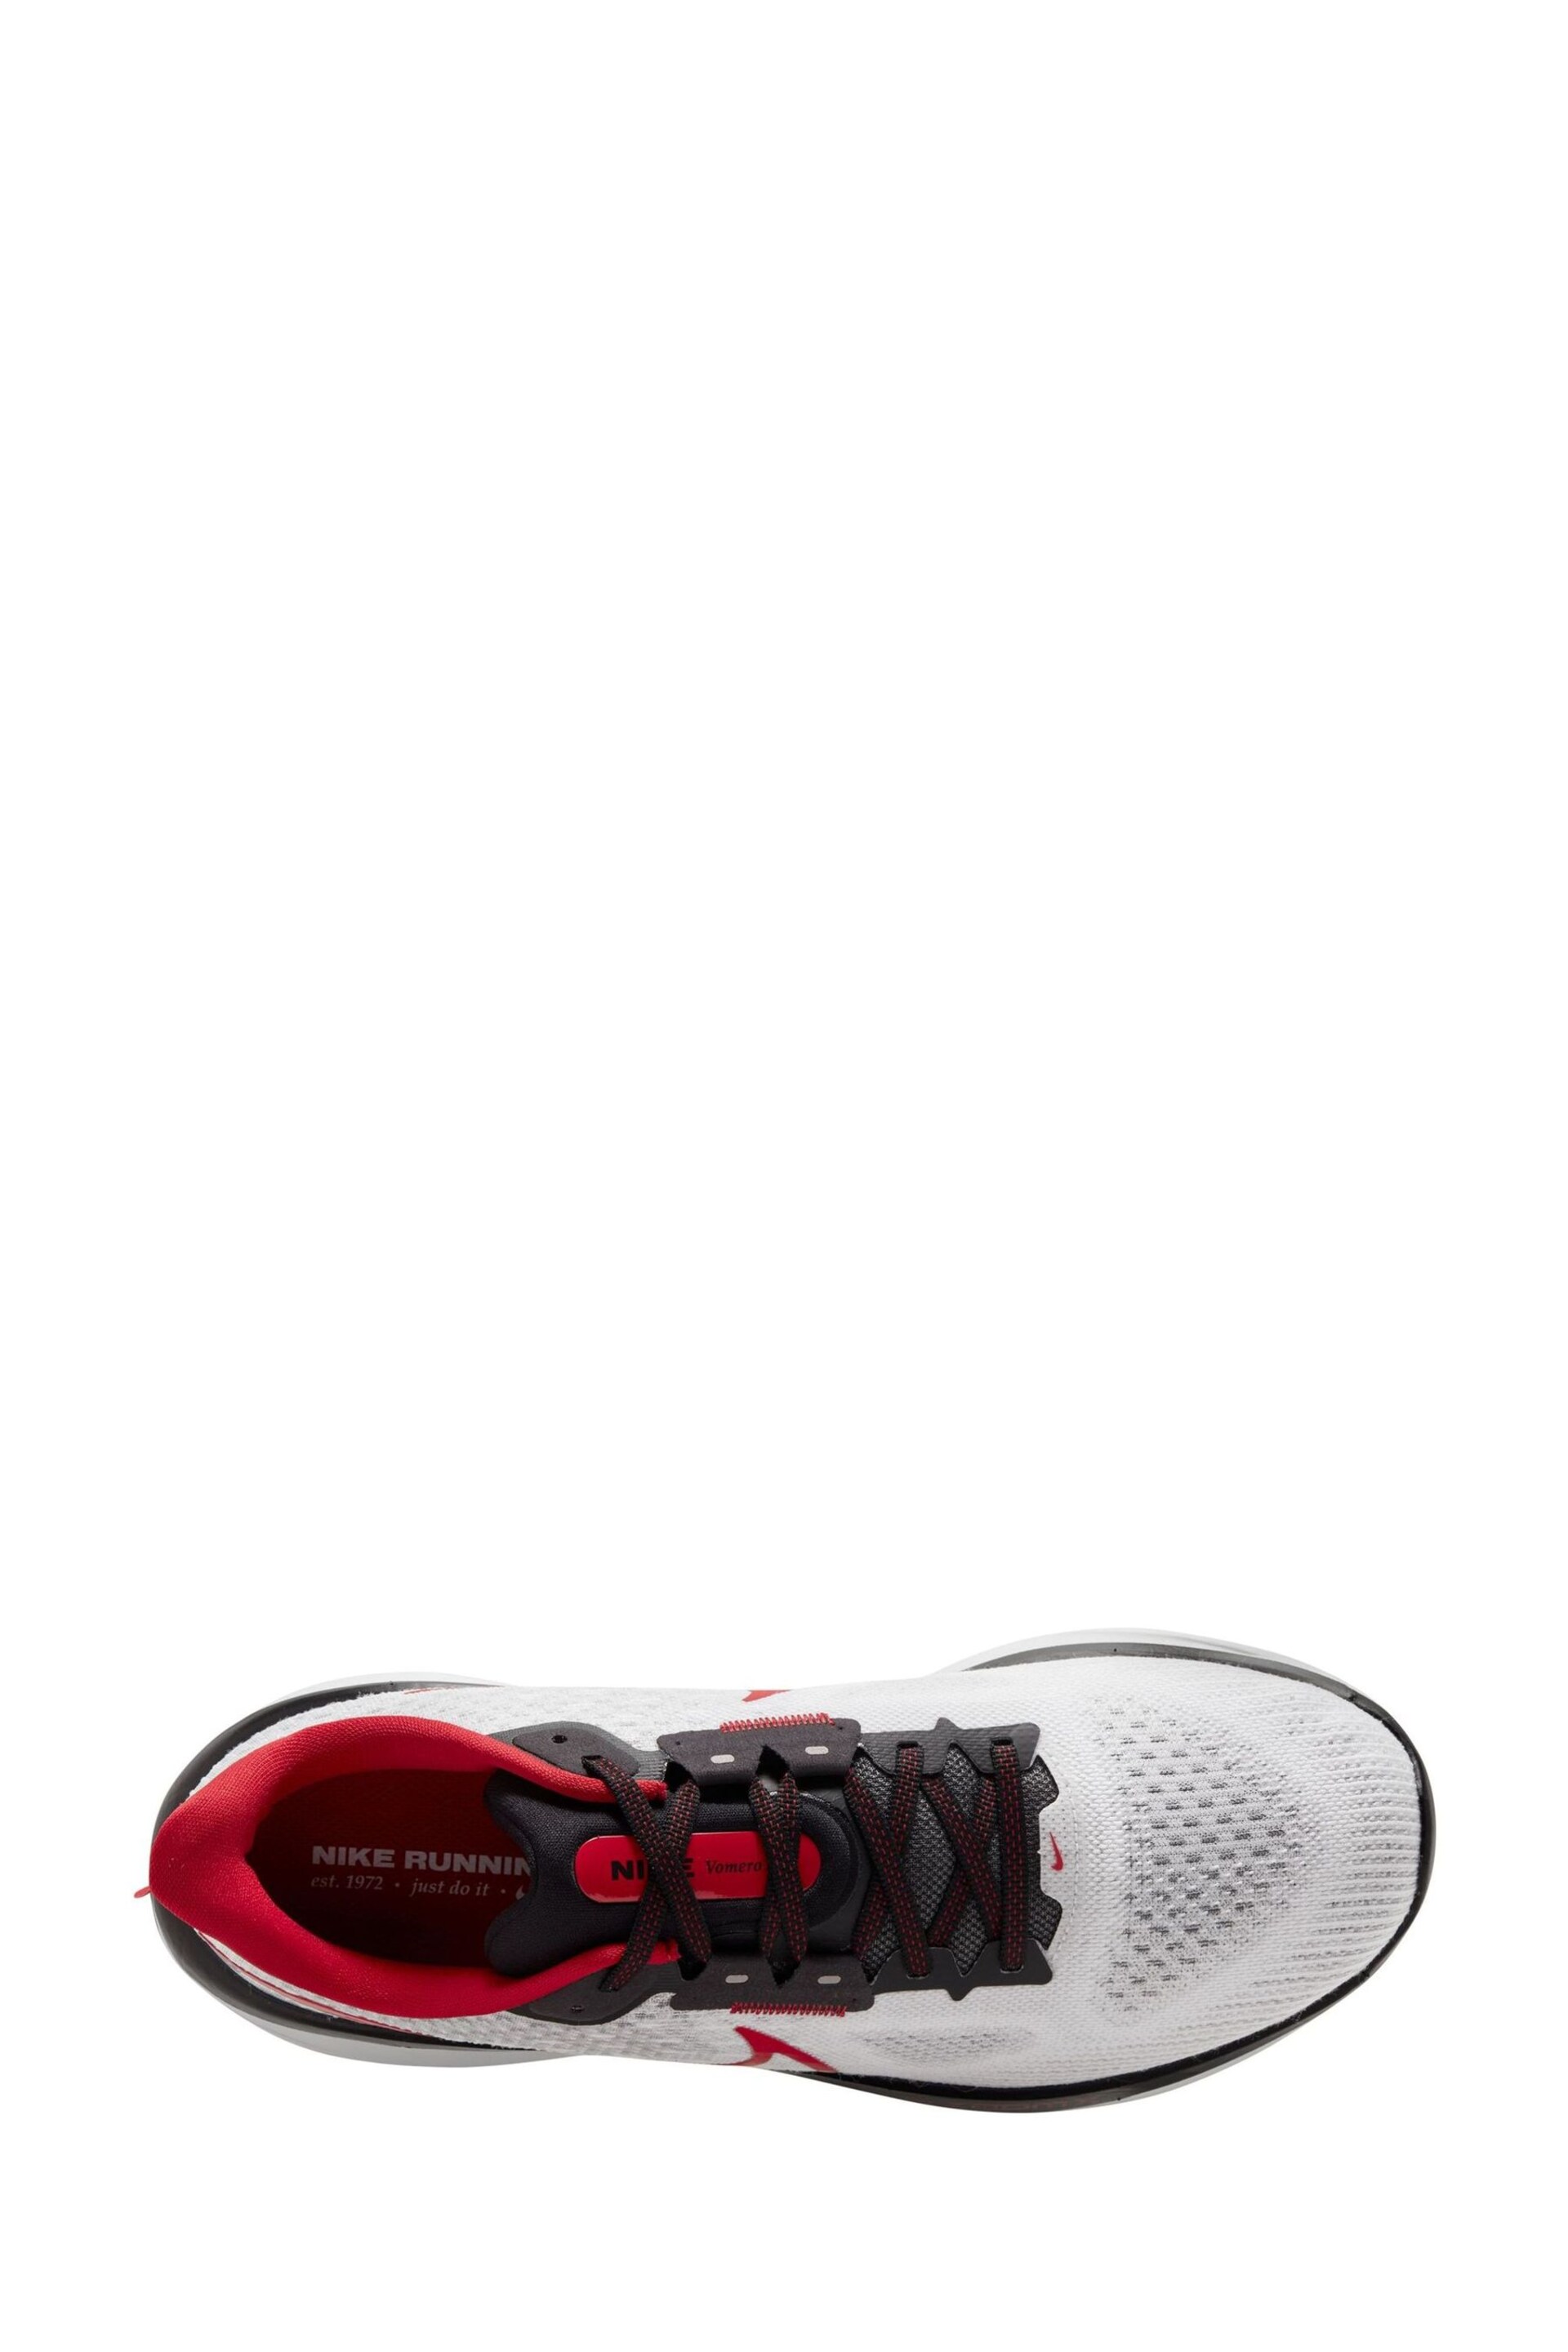 Nike Red/White Vomero 17 Road Running Trainers - Image 3 of 4